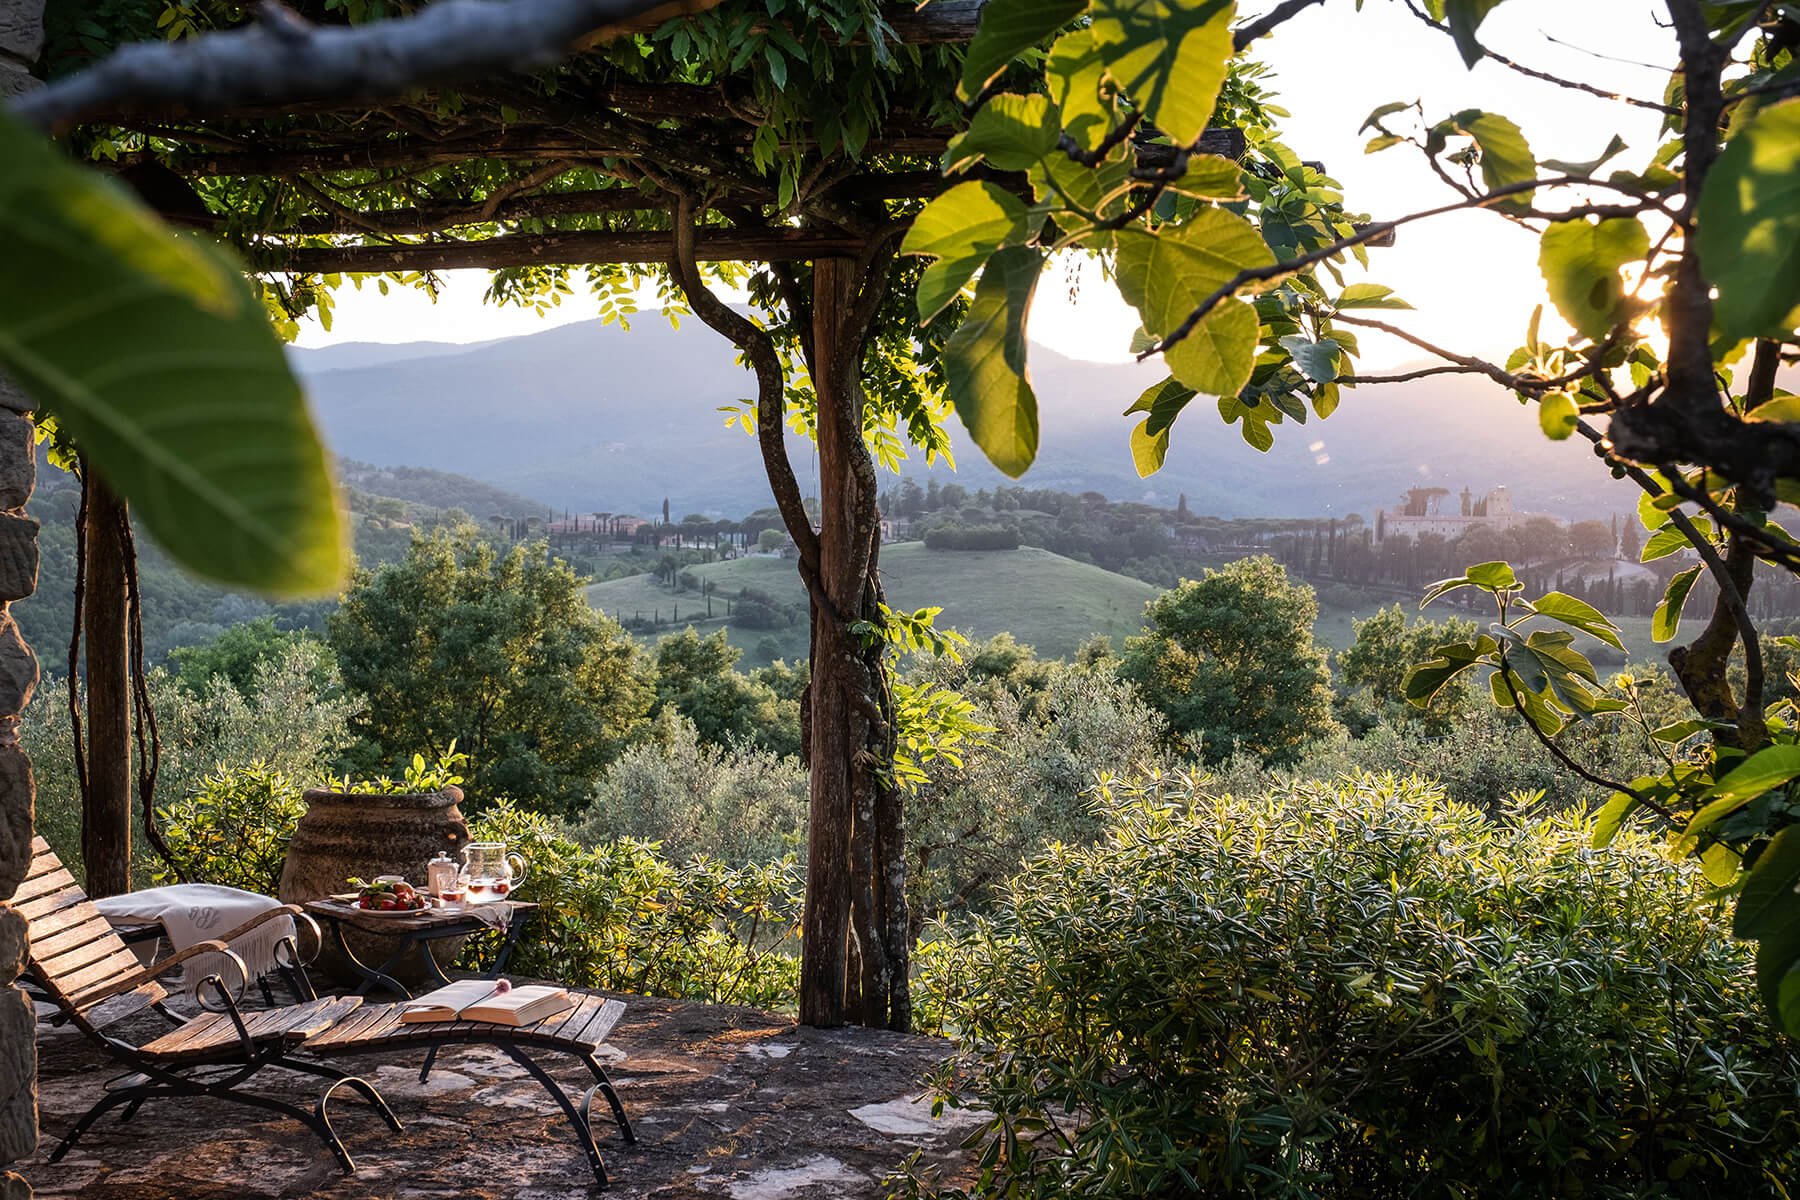 Francis York This Boutique Farmhouse in the Umbrian Hills is Available as a Luxury Villa Rental 14.jpg